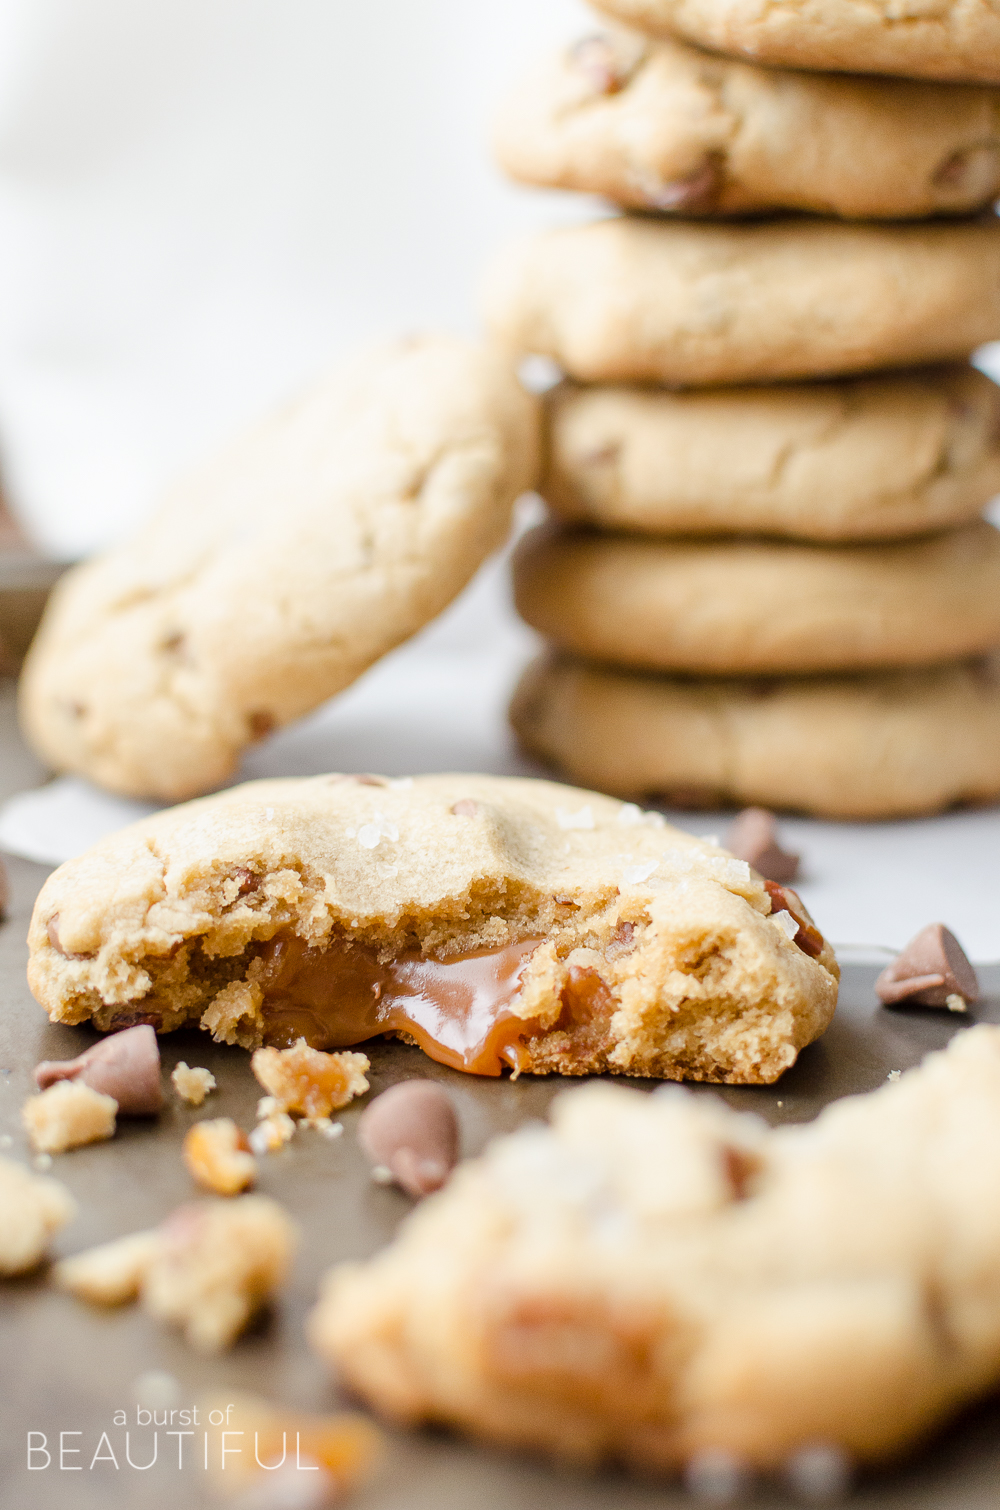 chocolate-chip-cookies-with-caramel-6454